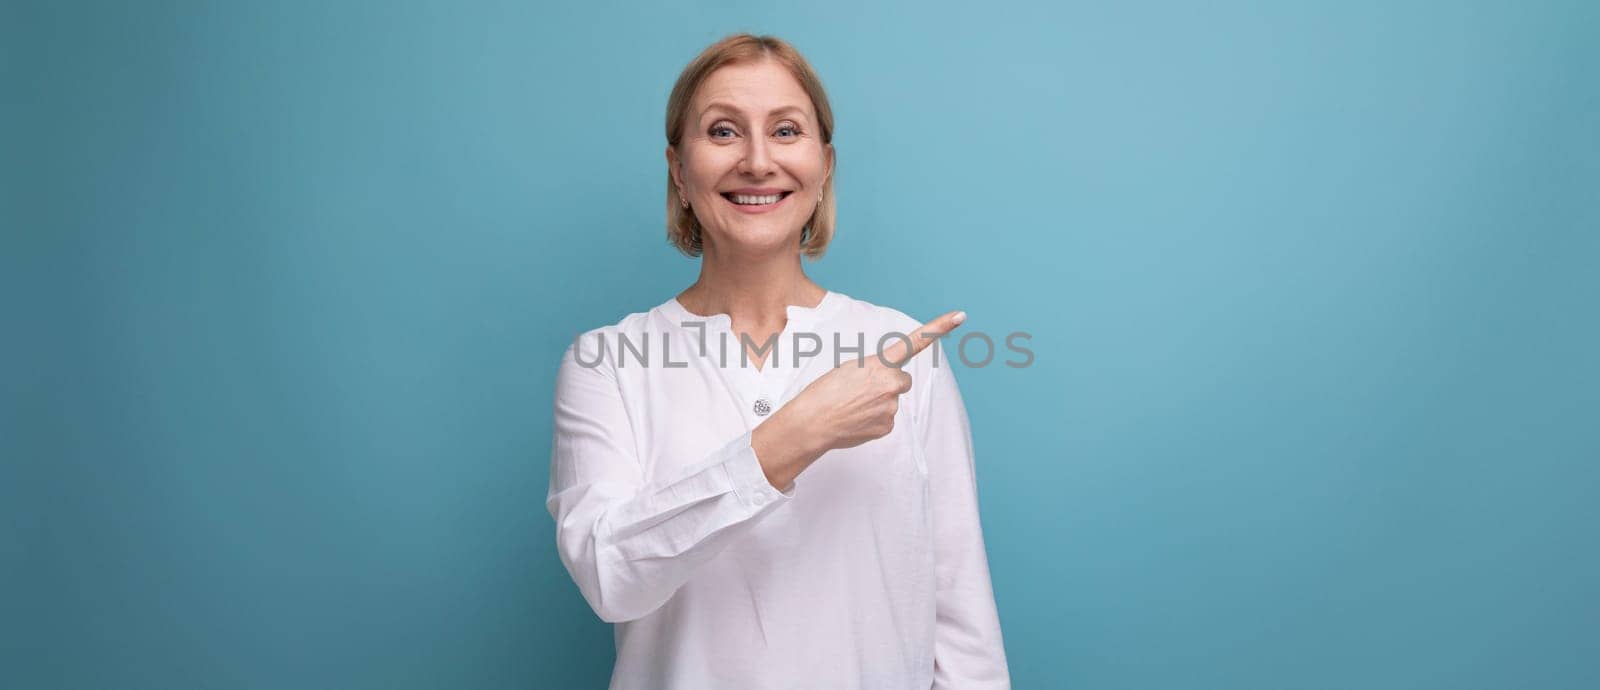 stylish blond middle-aged woman in a white blouse demonstrates something on a studio background with copyspace by TRMK